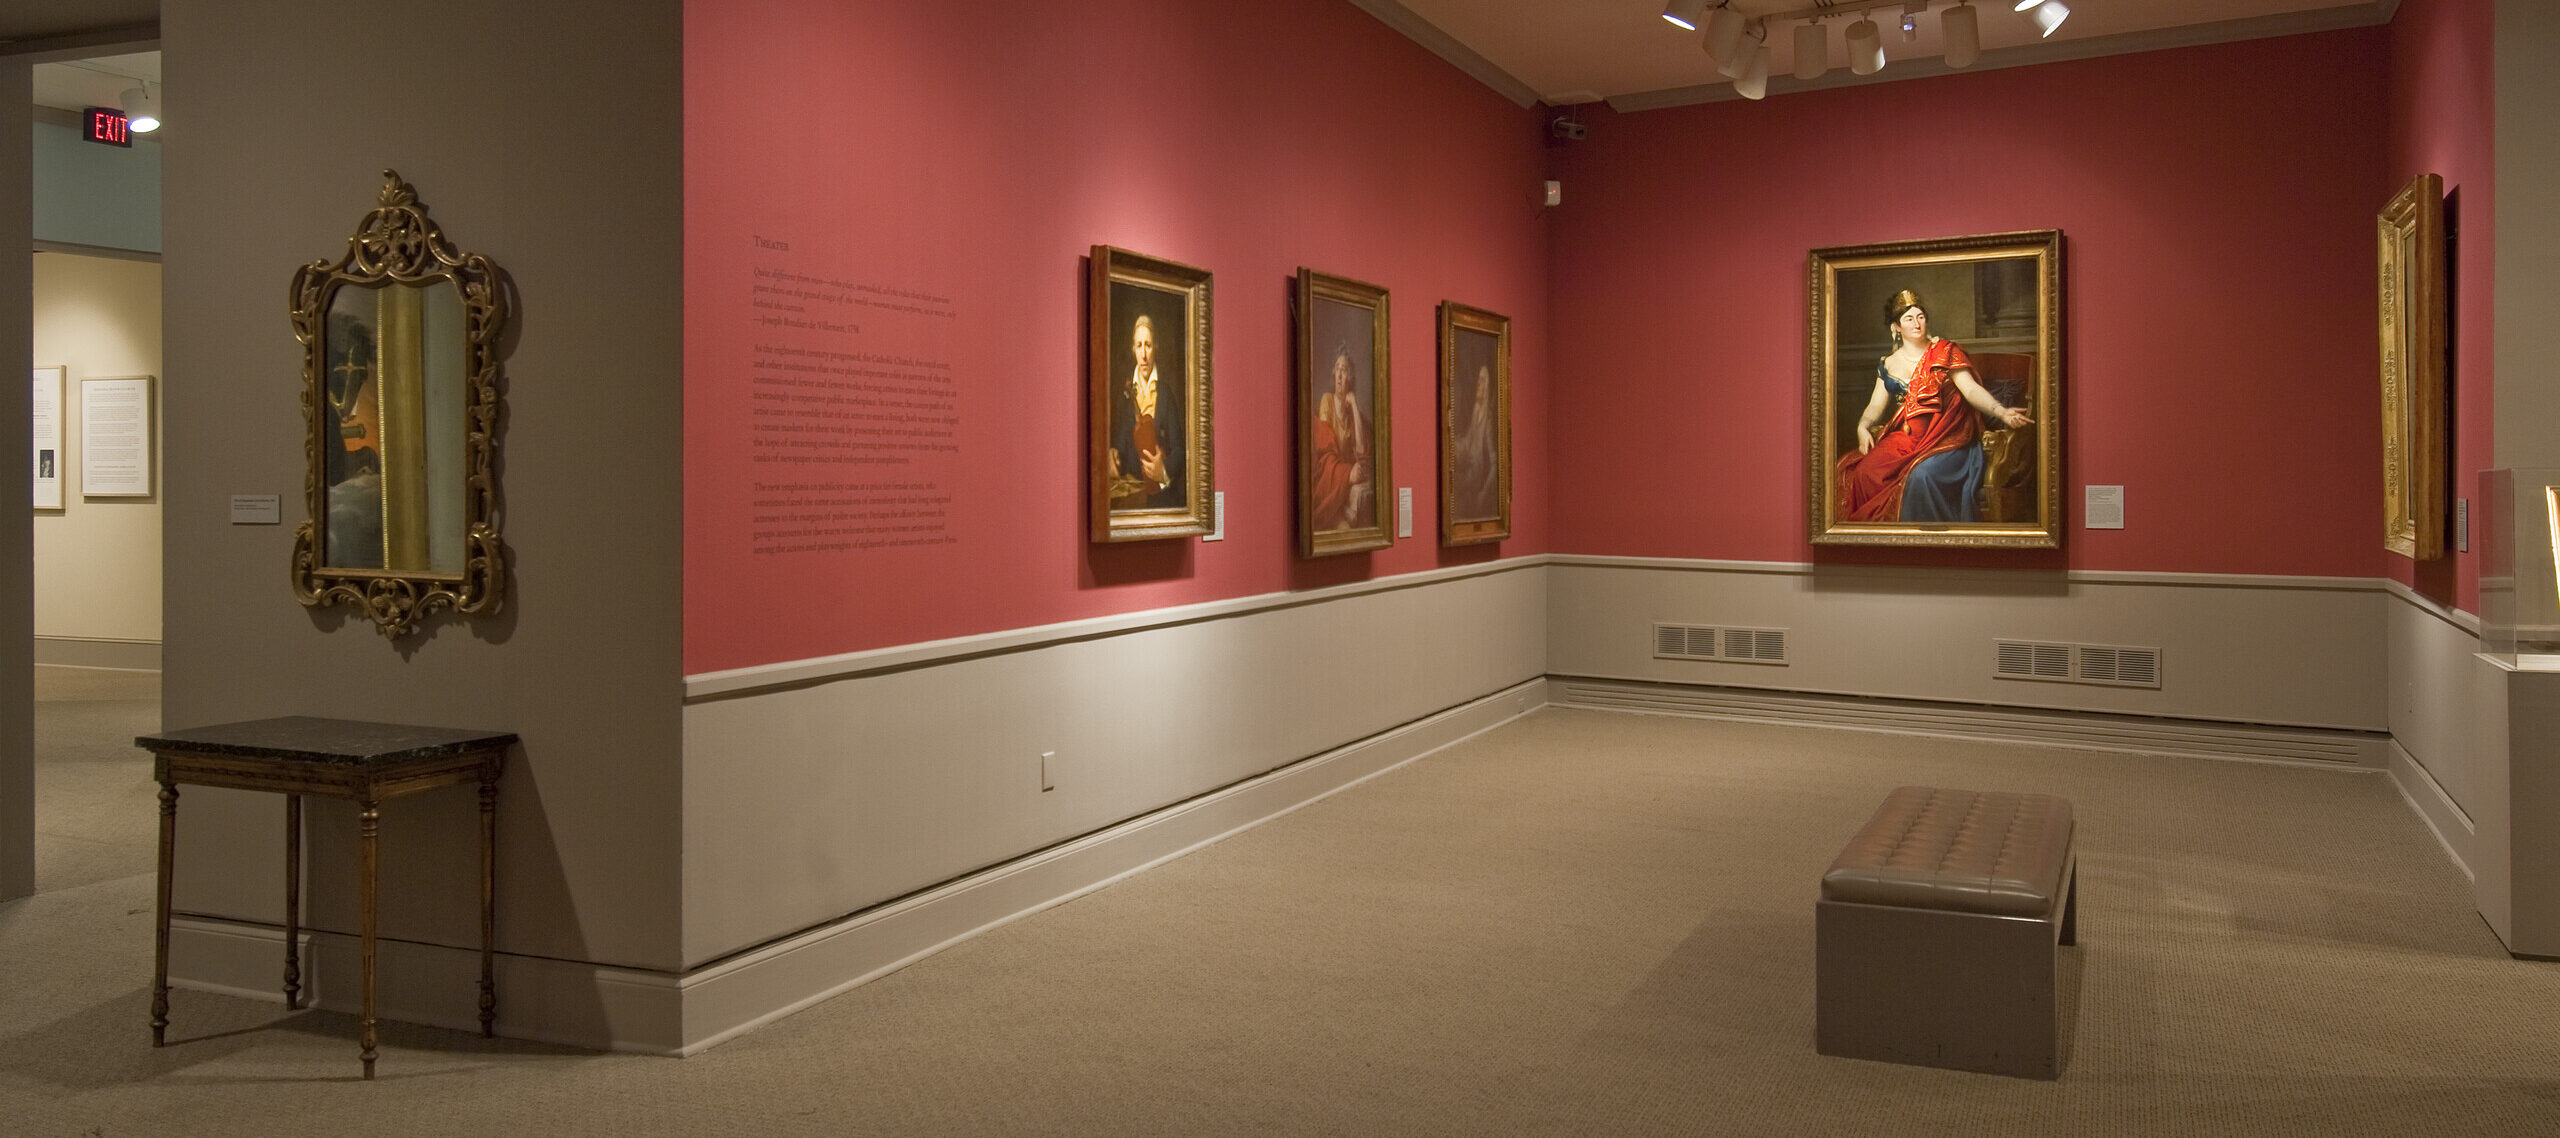 View of a gallery space with red walls. A golden mirror with plenty of ornaments is hanging to the left, large historical portraits of women are hanging to the right.